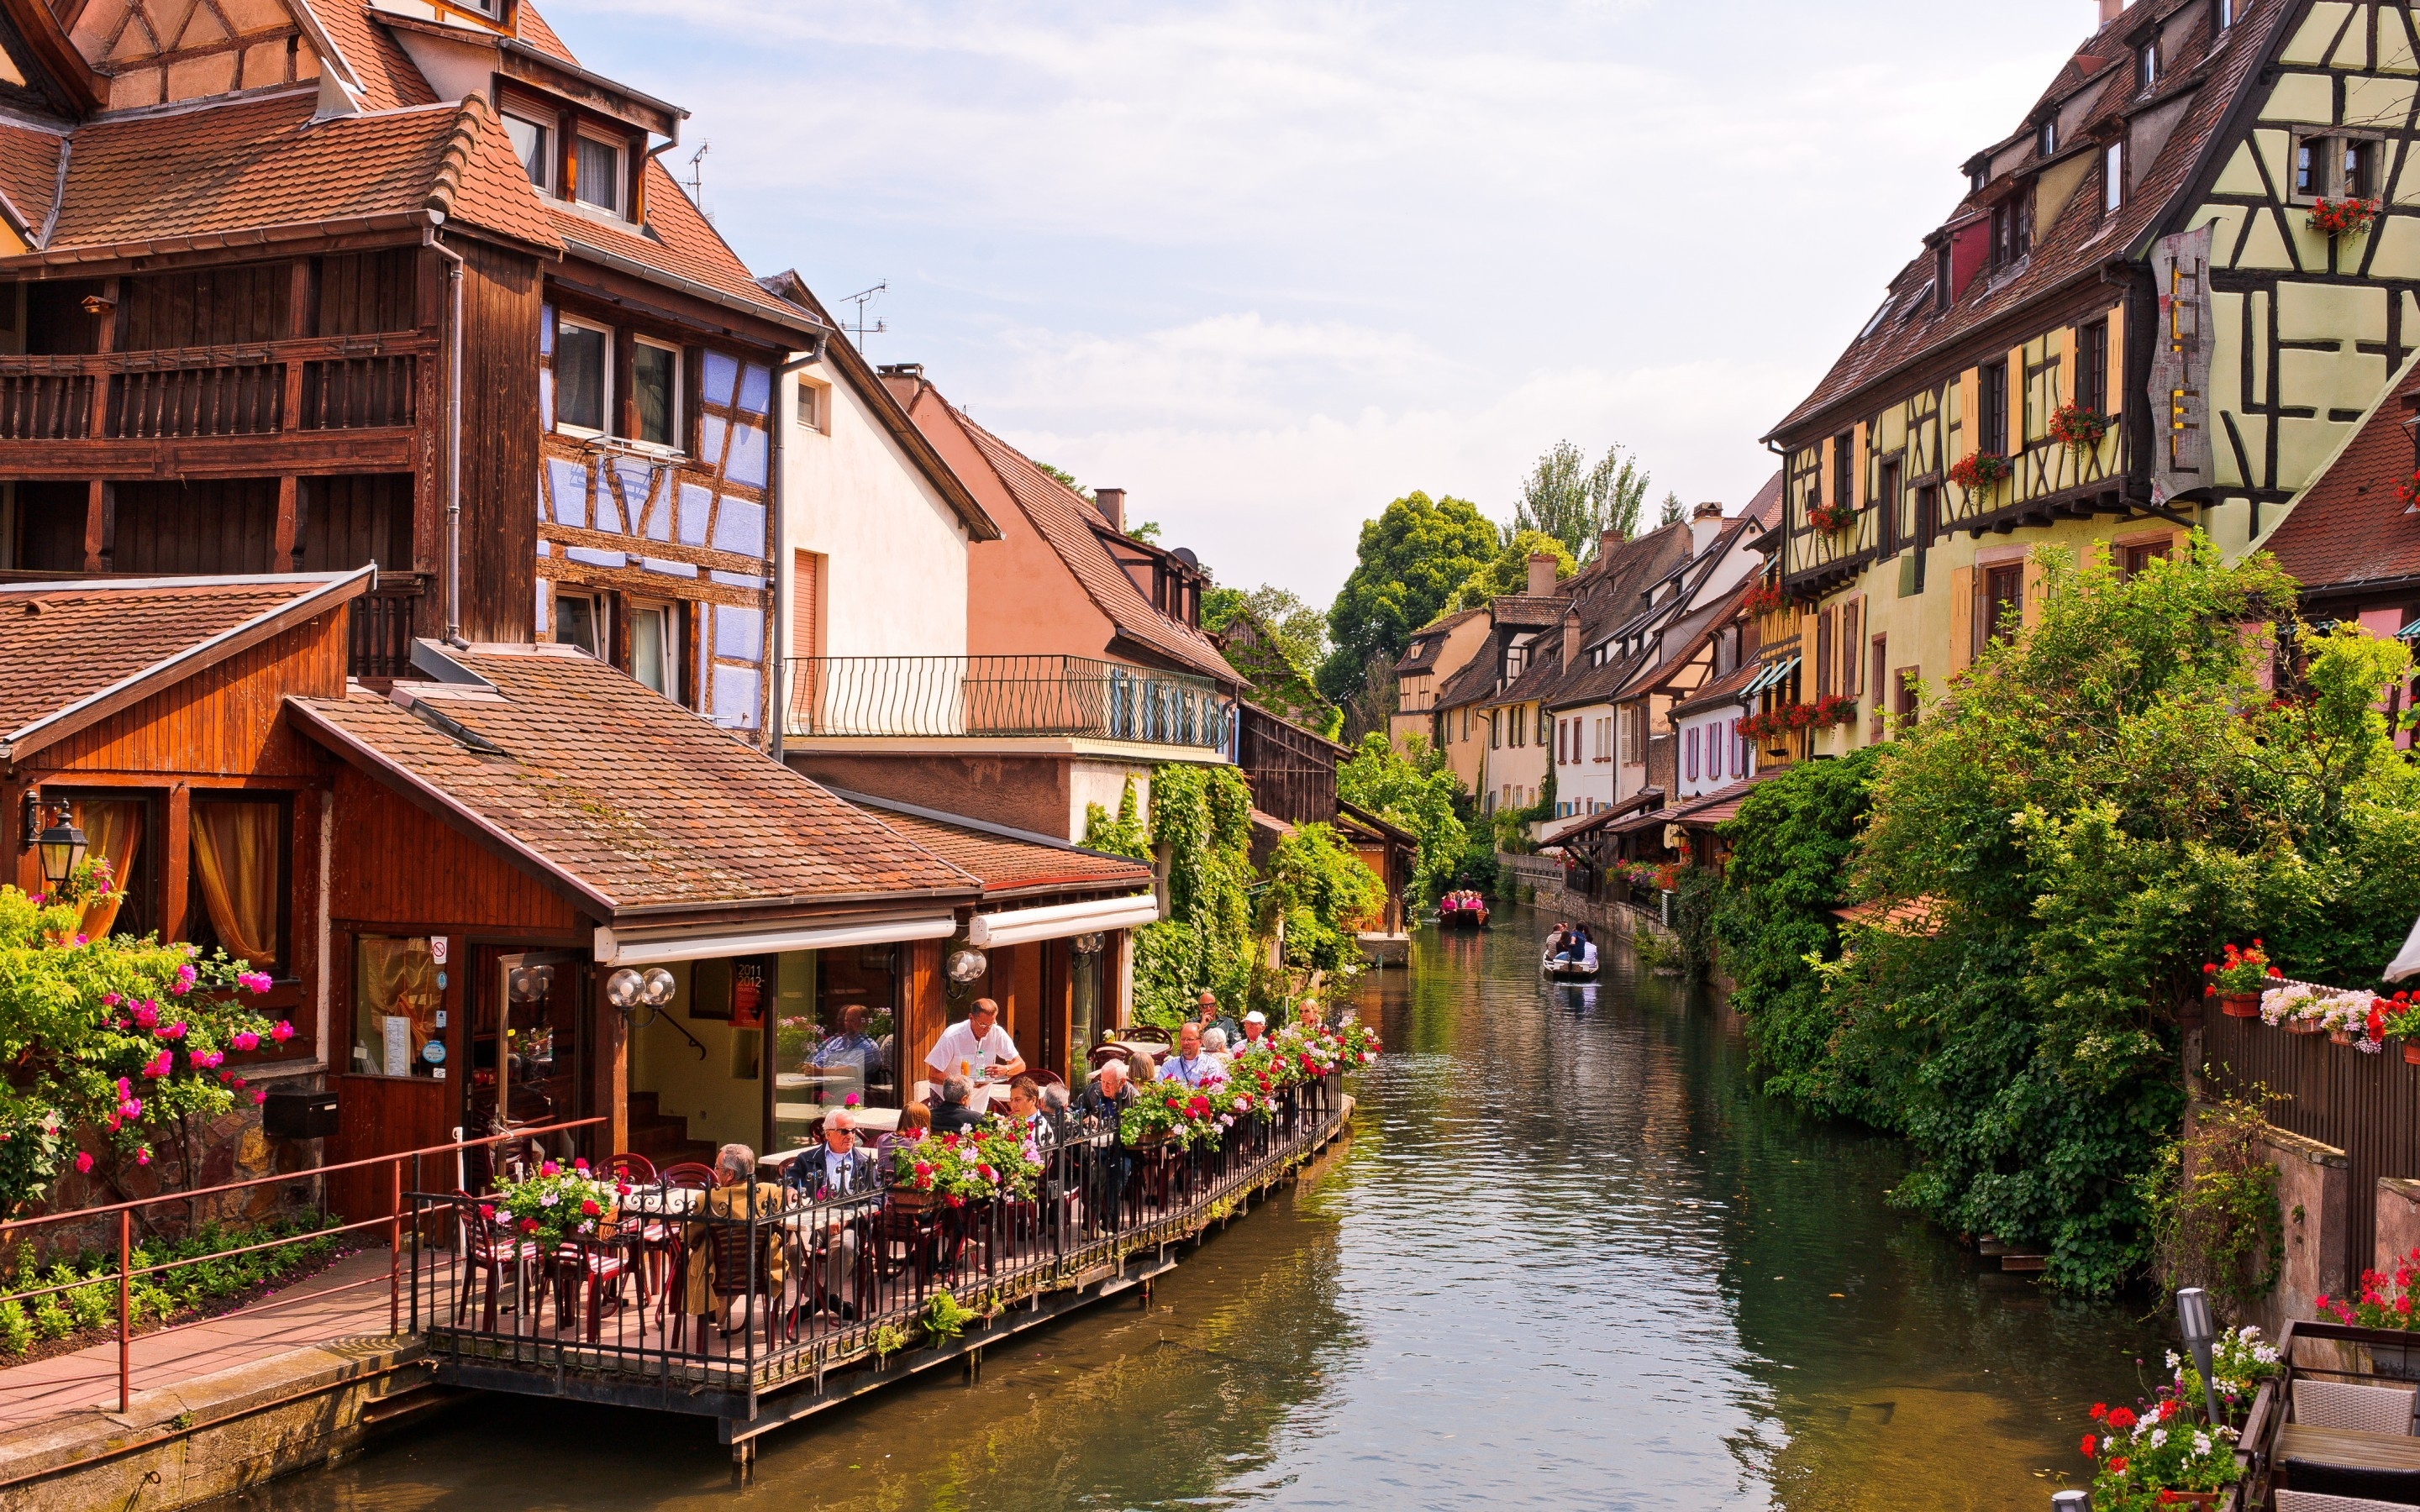 Colmar Alsace View for 2880 x 1800 Retina Display resolution